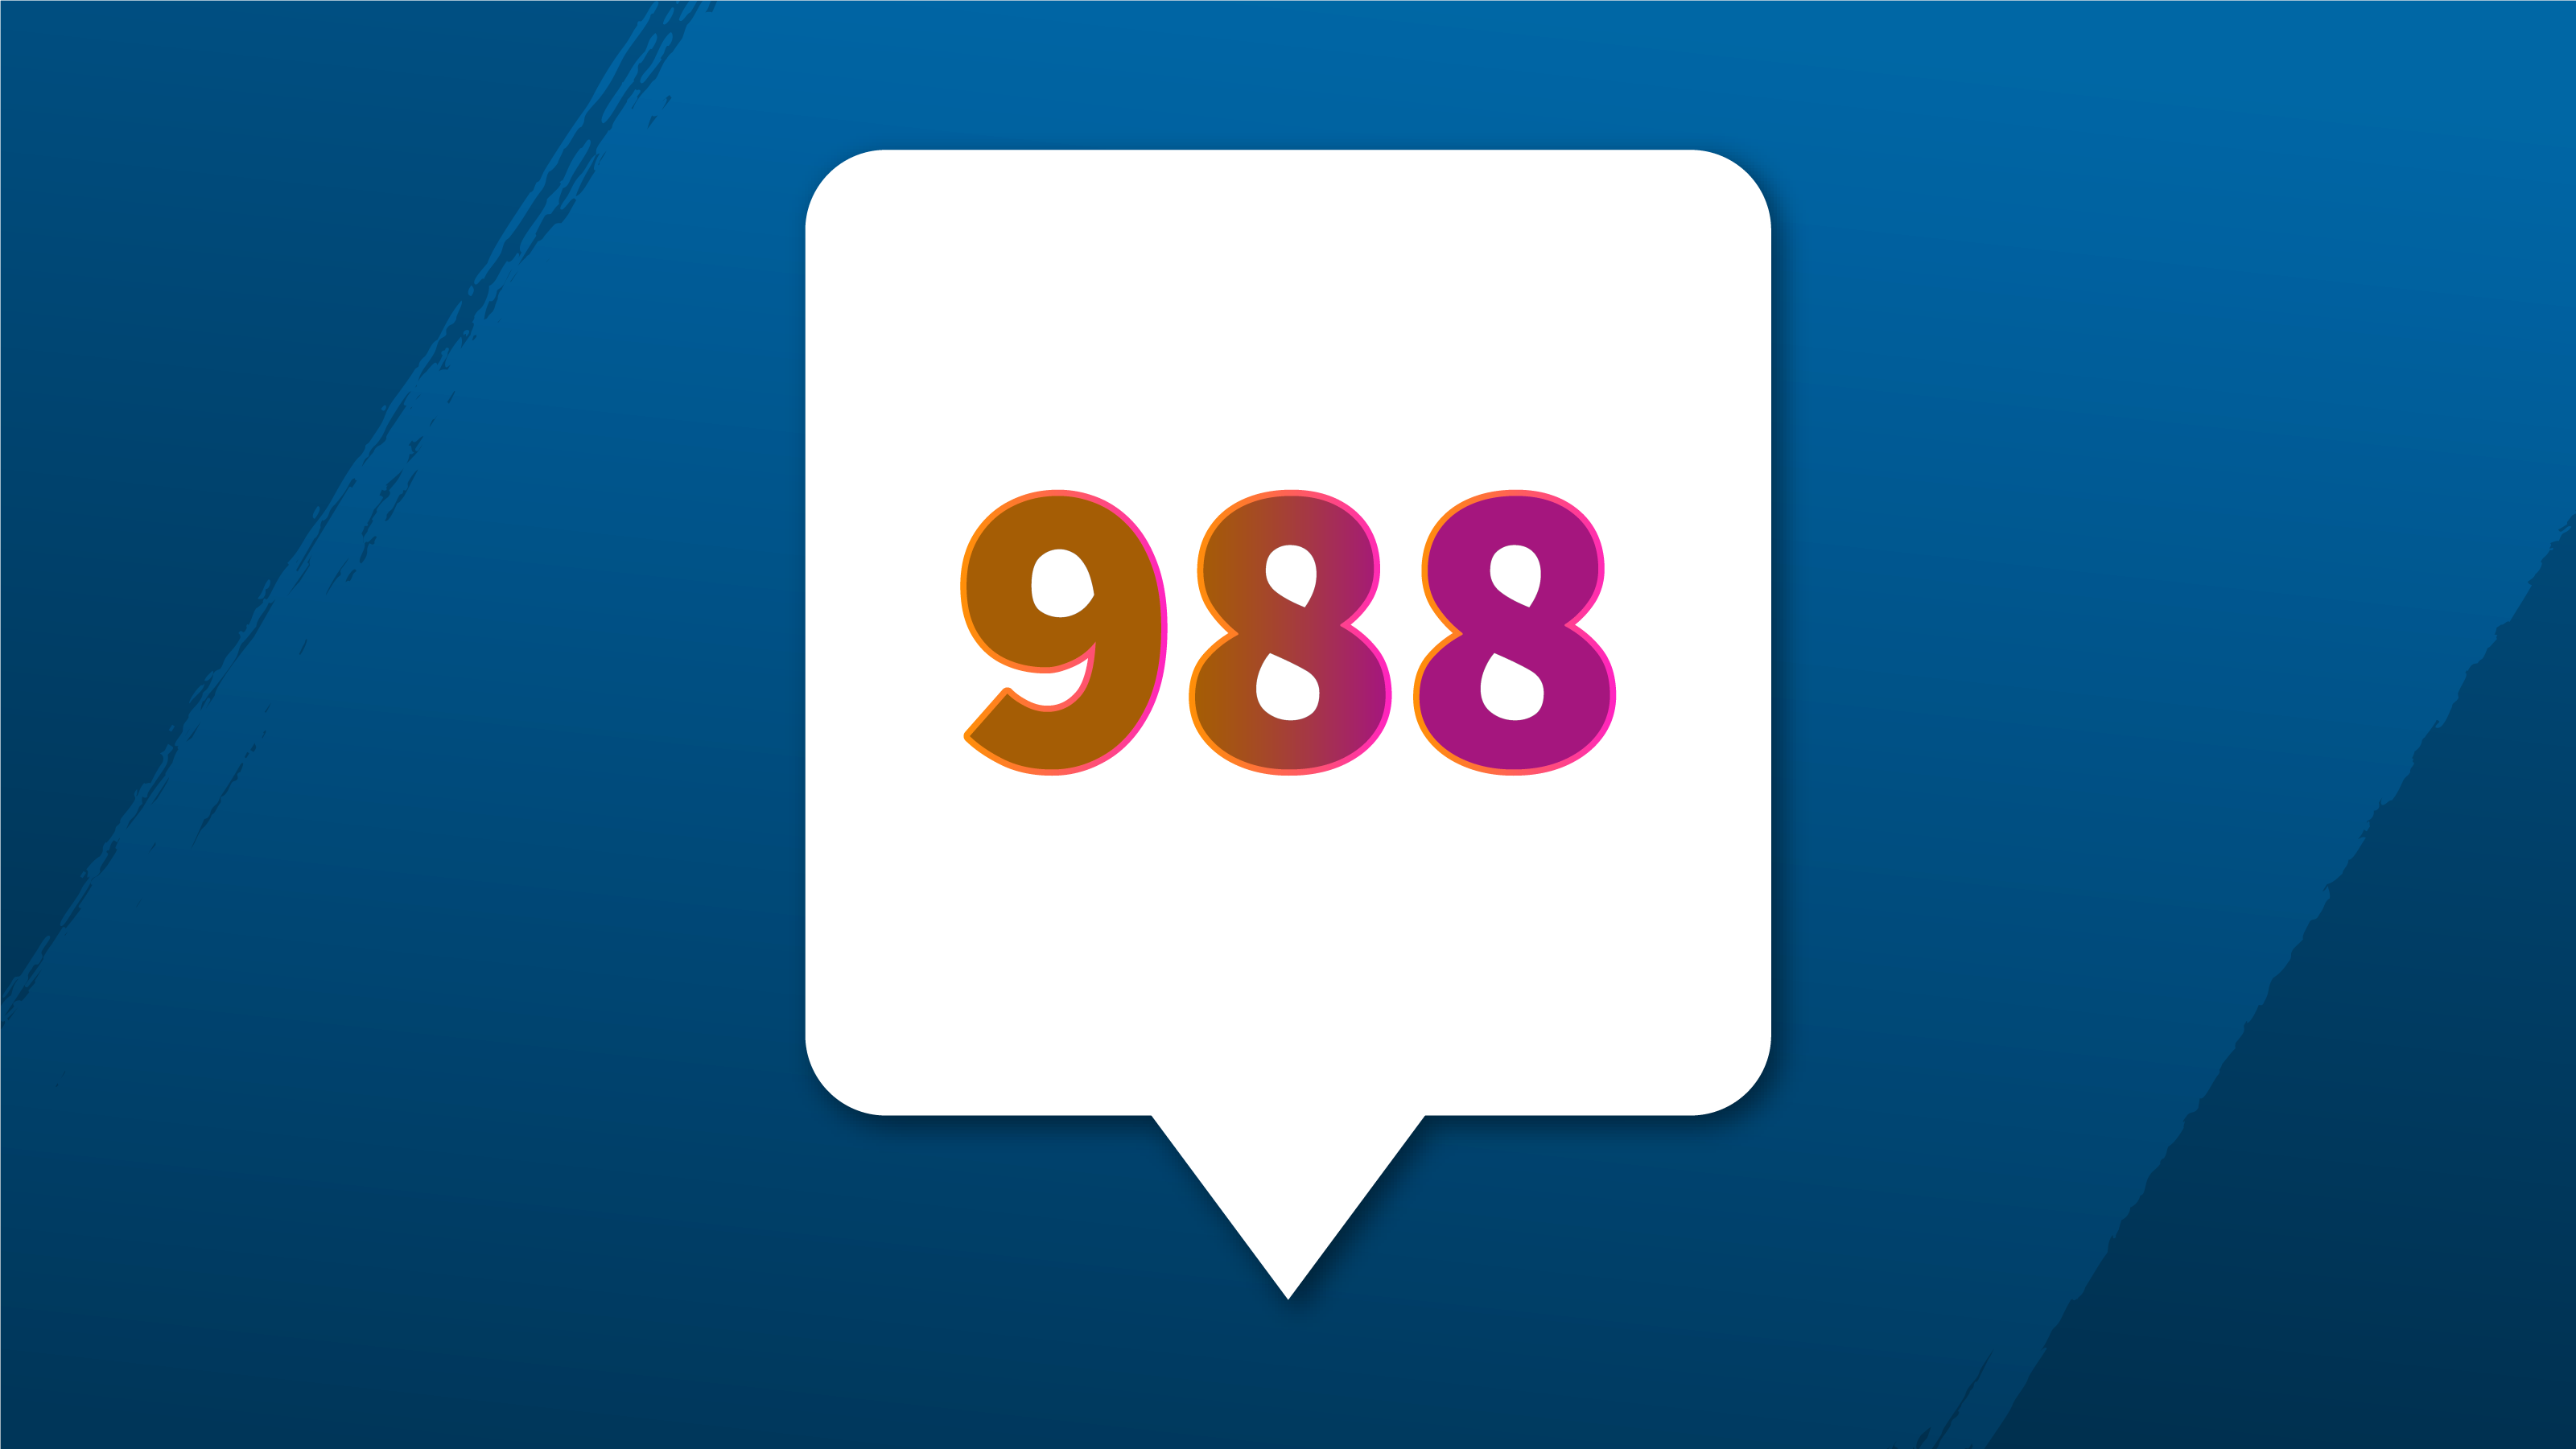 Blue background with white textbox and pink and orange, "988" inside